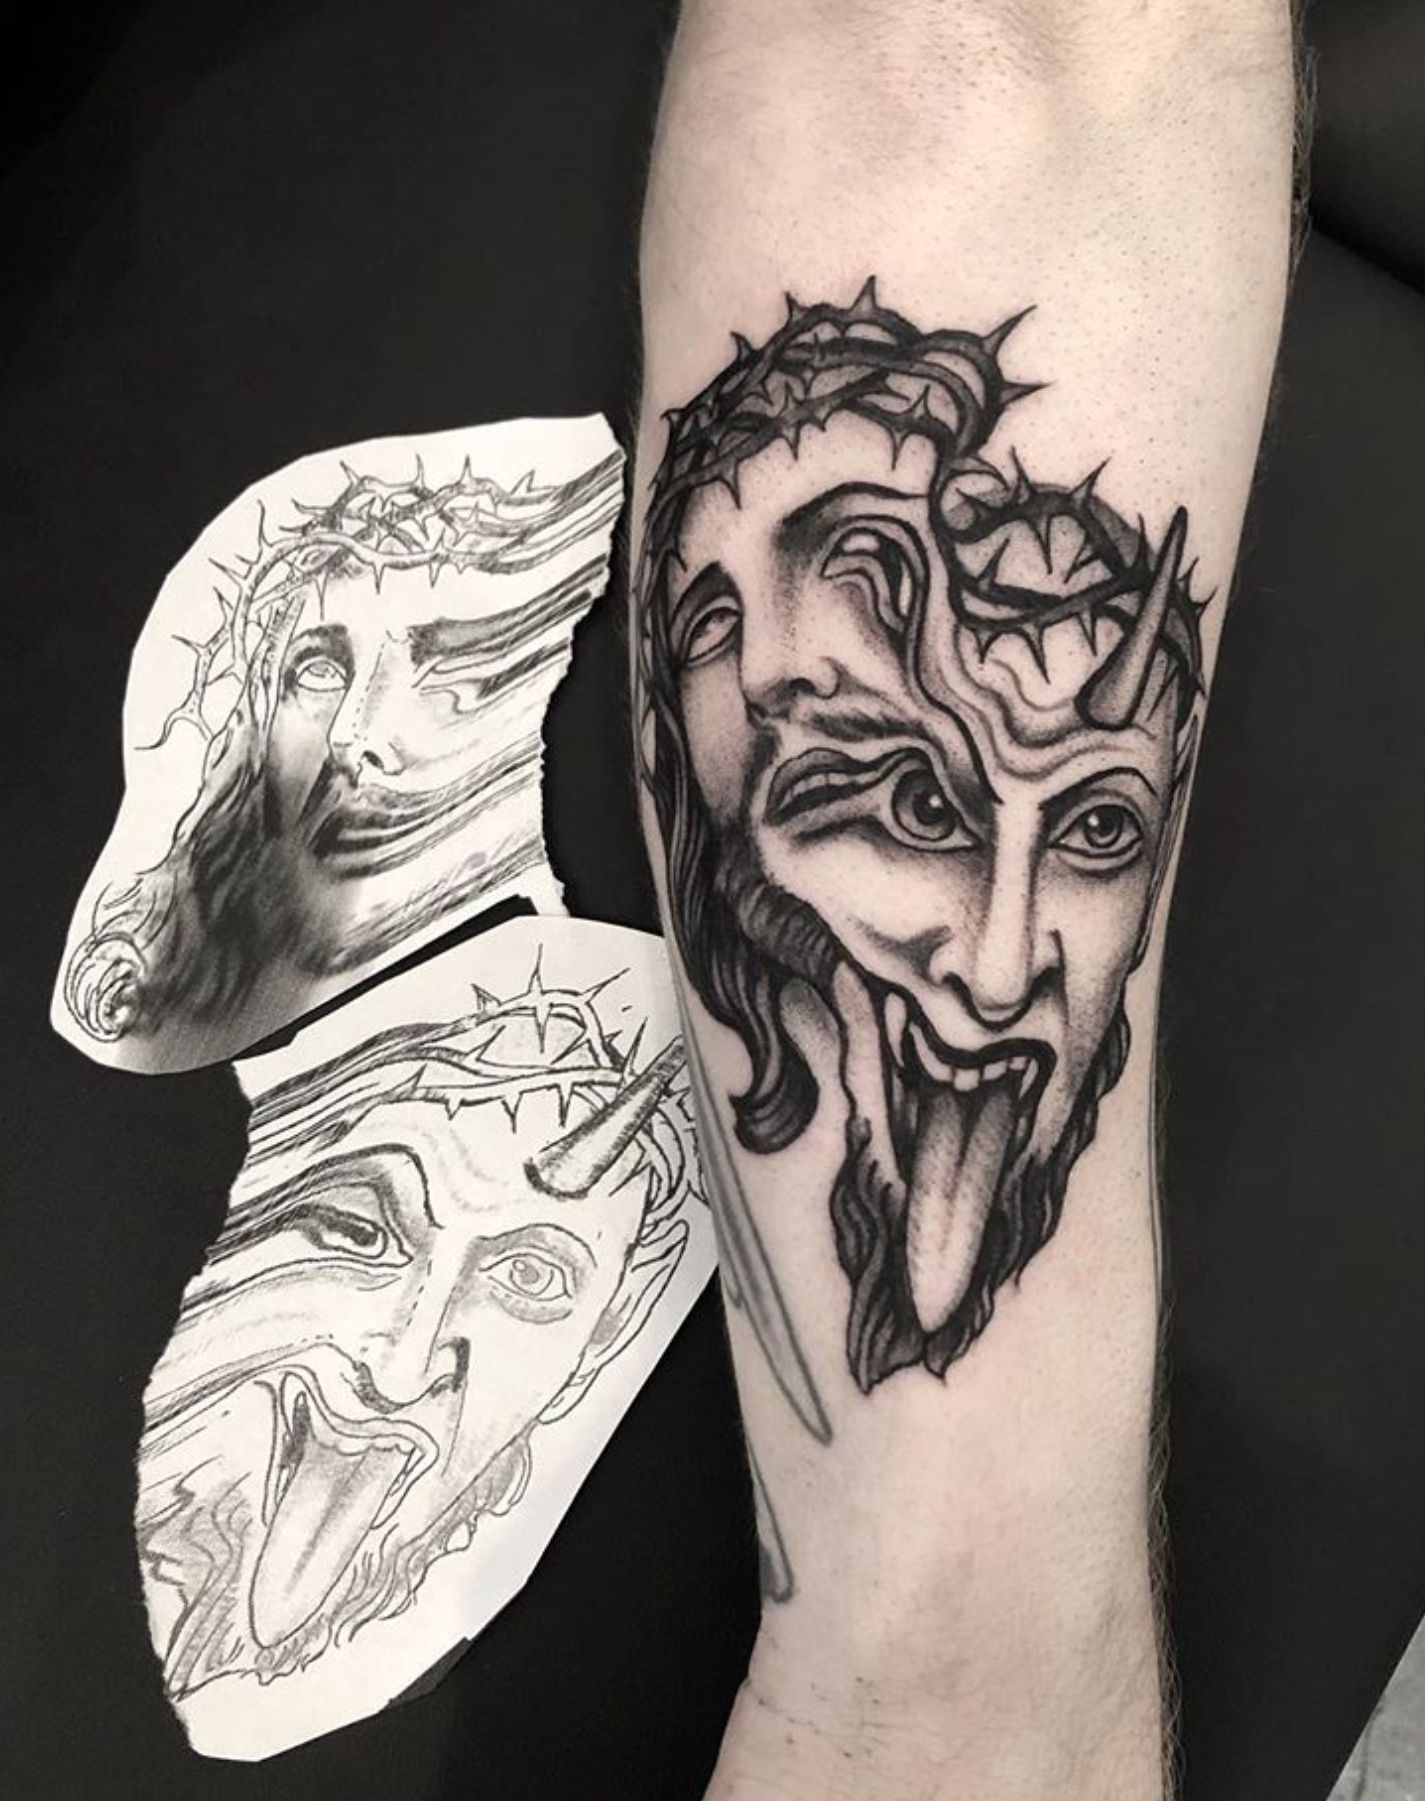 Faces tattoo by Mo Ganji | Post 31142